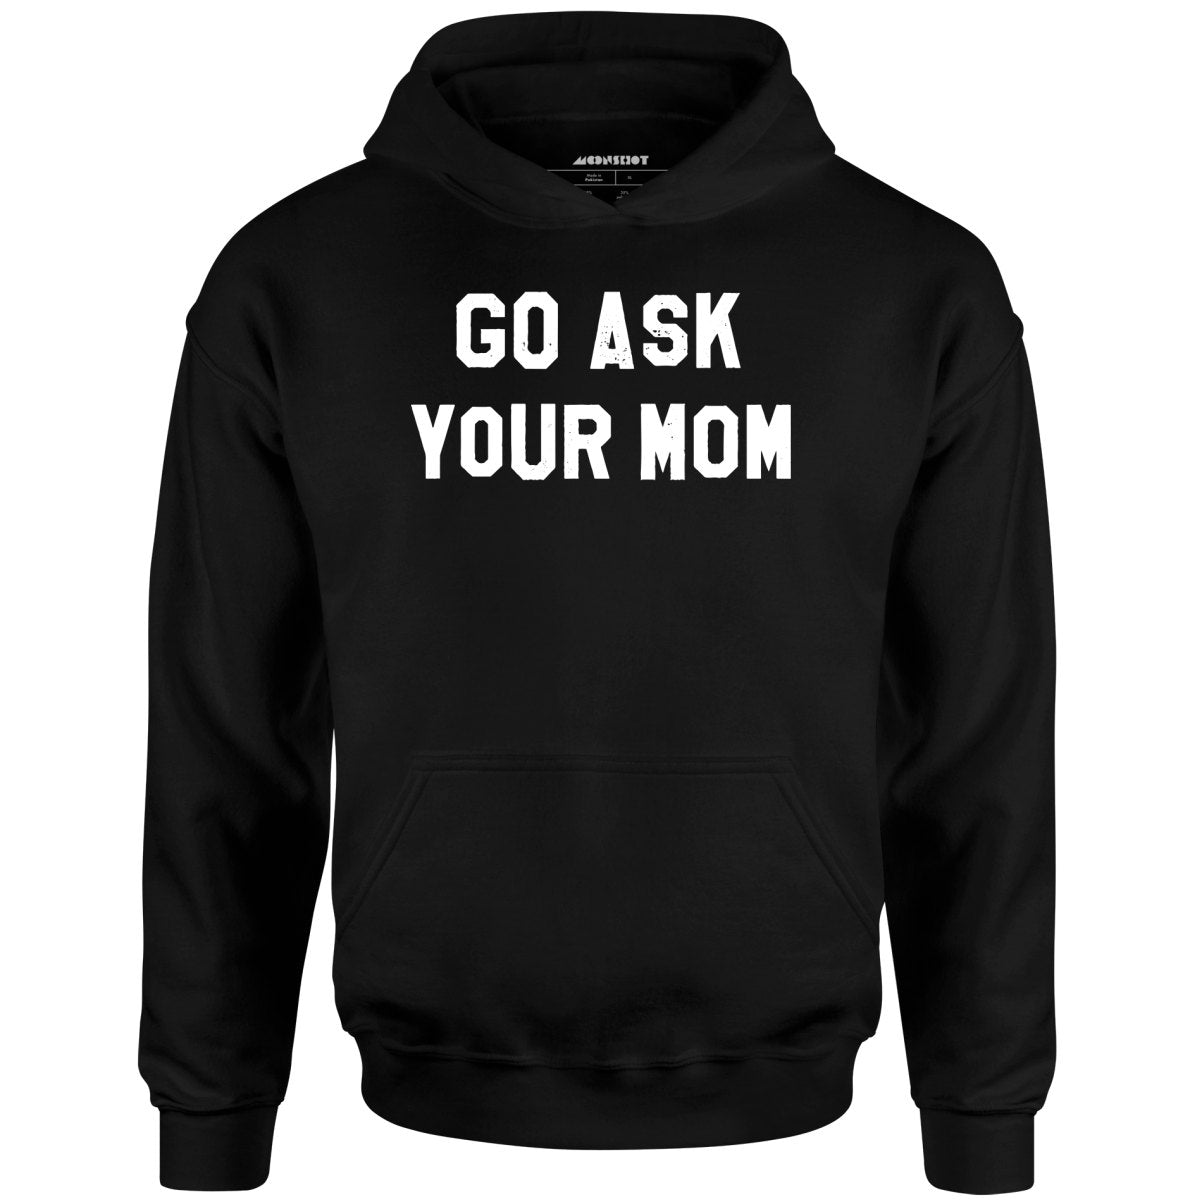 Go Ask Your Mom - Unisex Hoodie